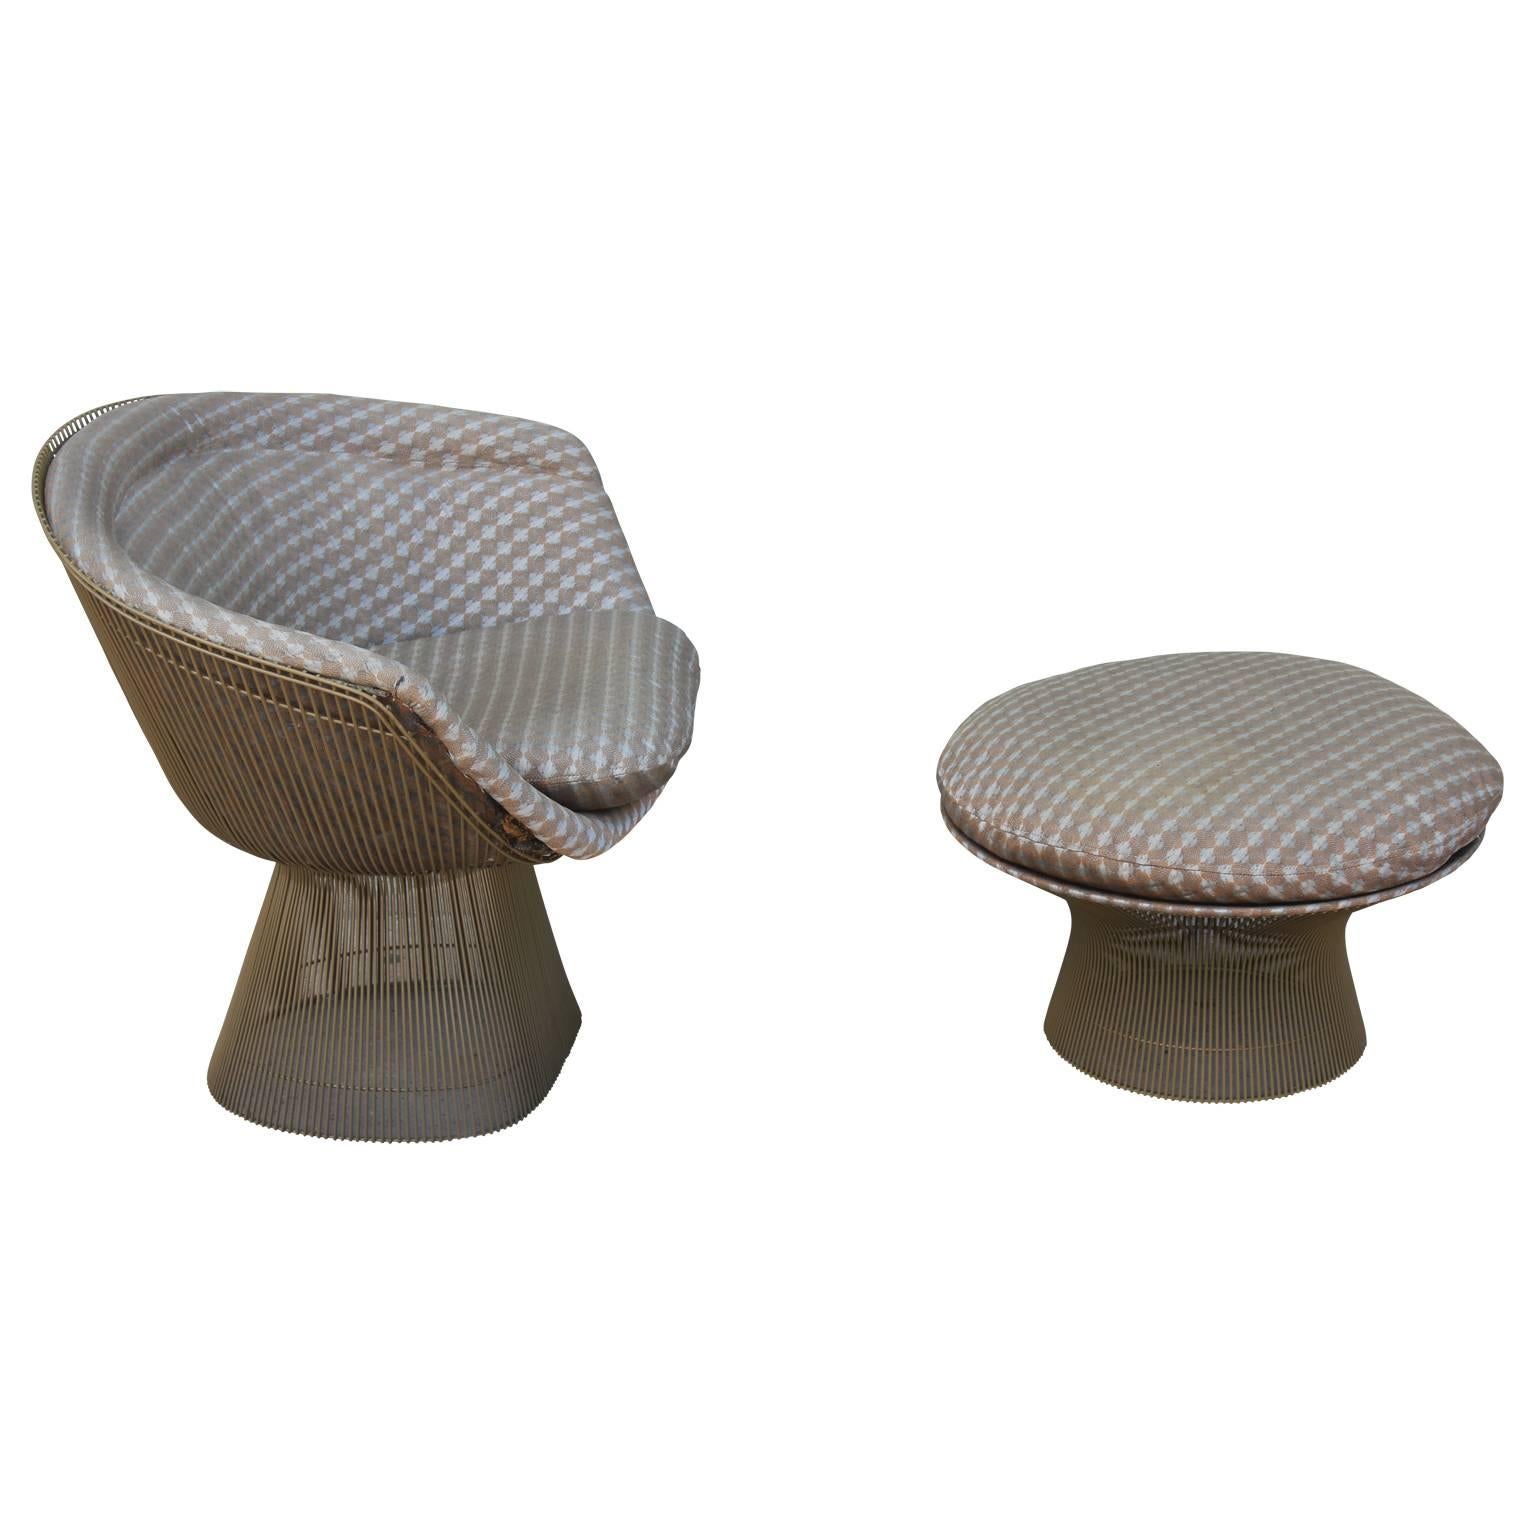 Warren Platner lounge chair with matching ottoman for Knoll. The frame was powder coated in a unique grey in the 1990s.
Ottoman dimensions: 13 in H x 26 in W.